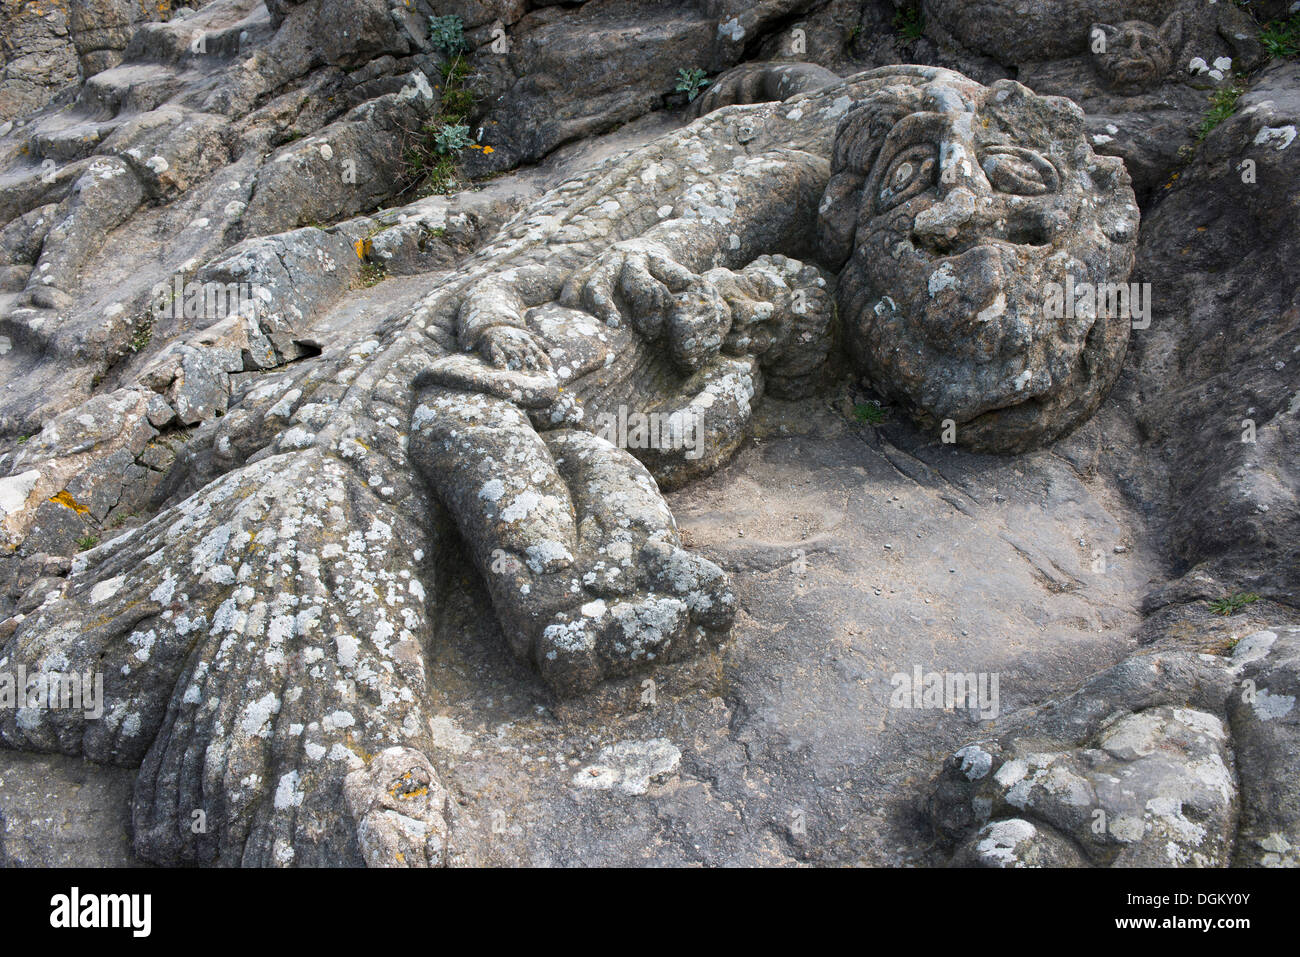 Stone dragon in the garden of sculpted rocks by Abbé Fouré, Rothéneuf, Brittany, France, Europe Stock Photo